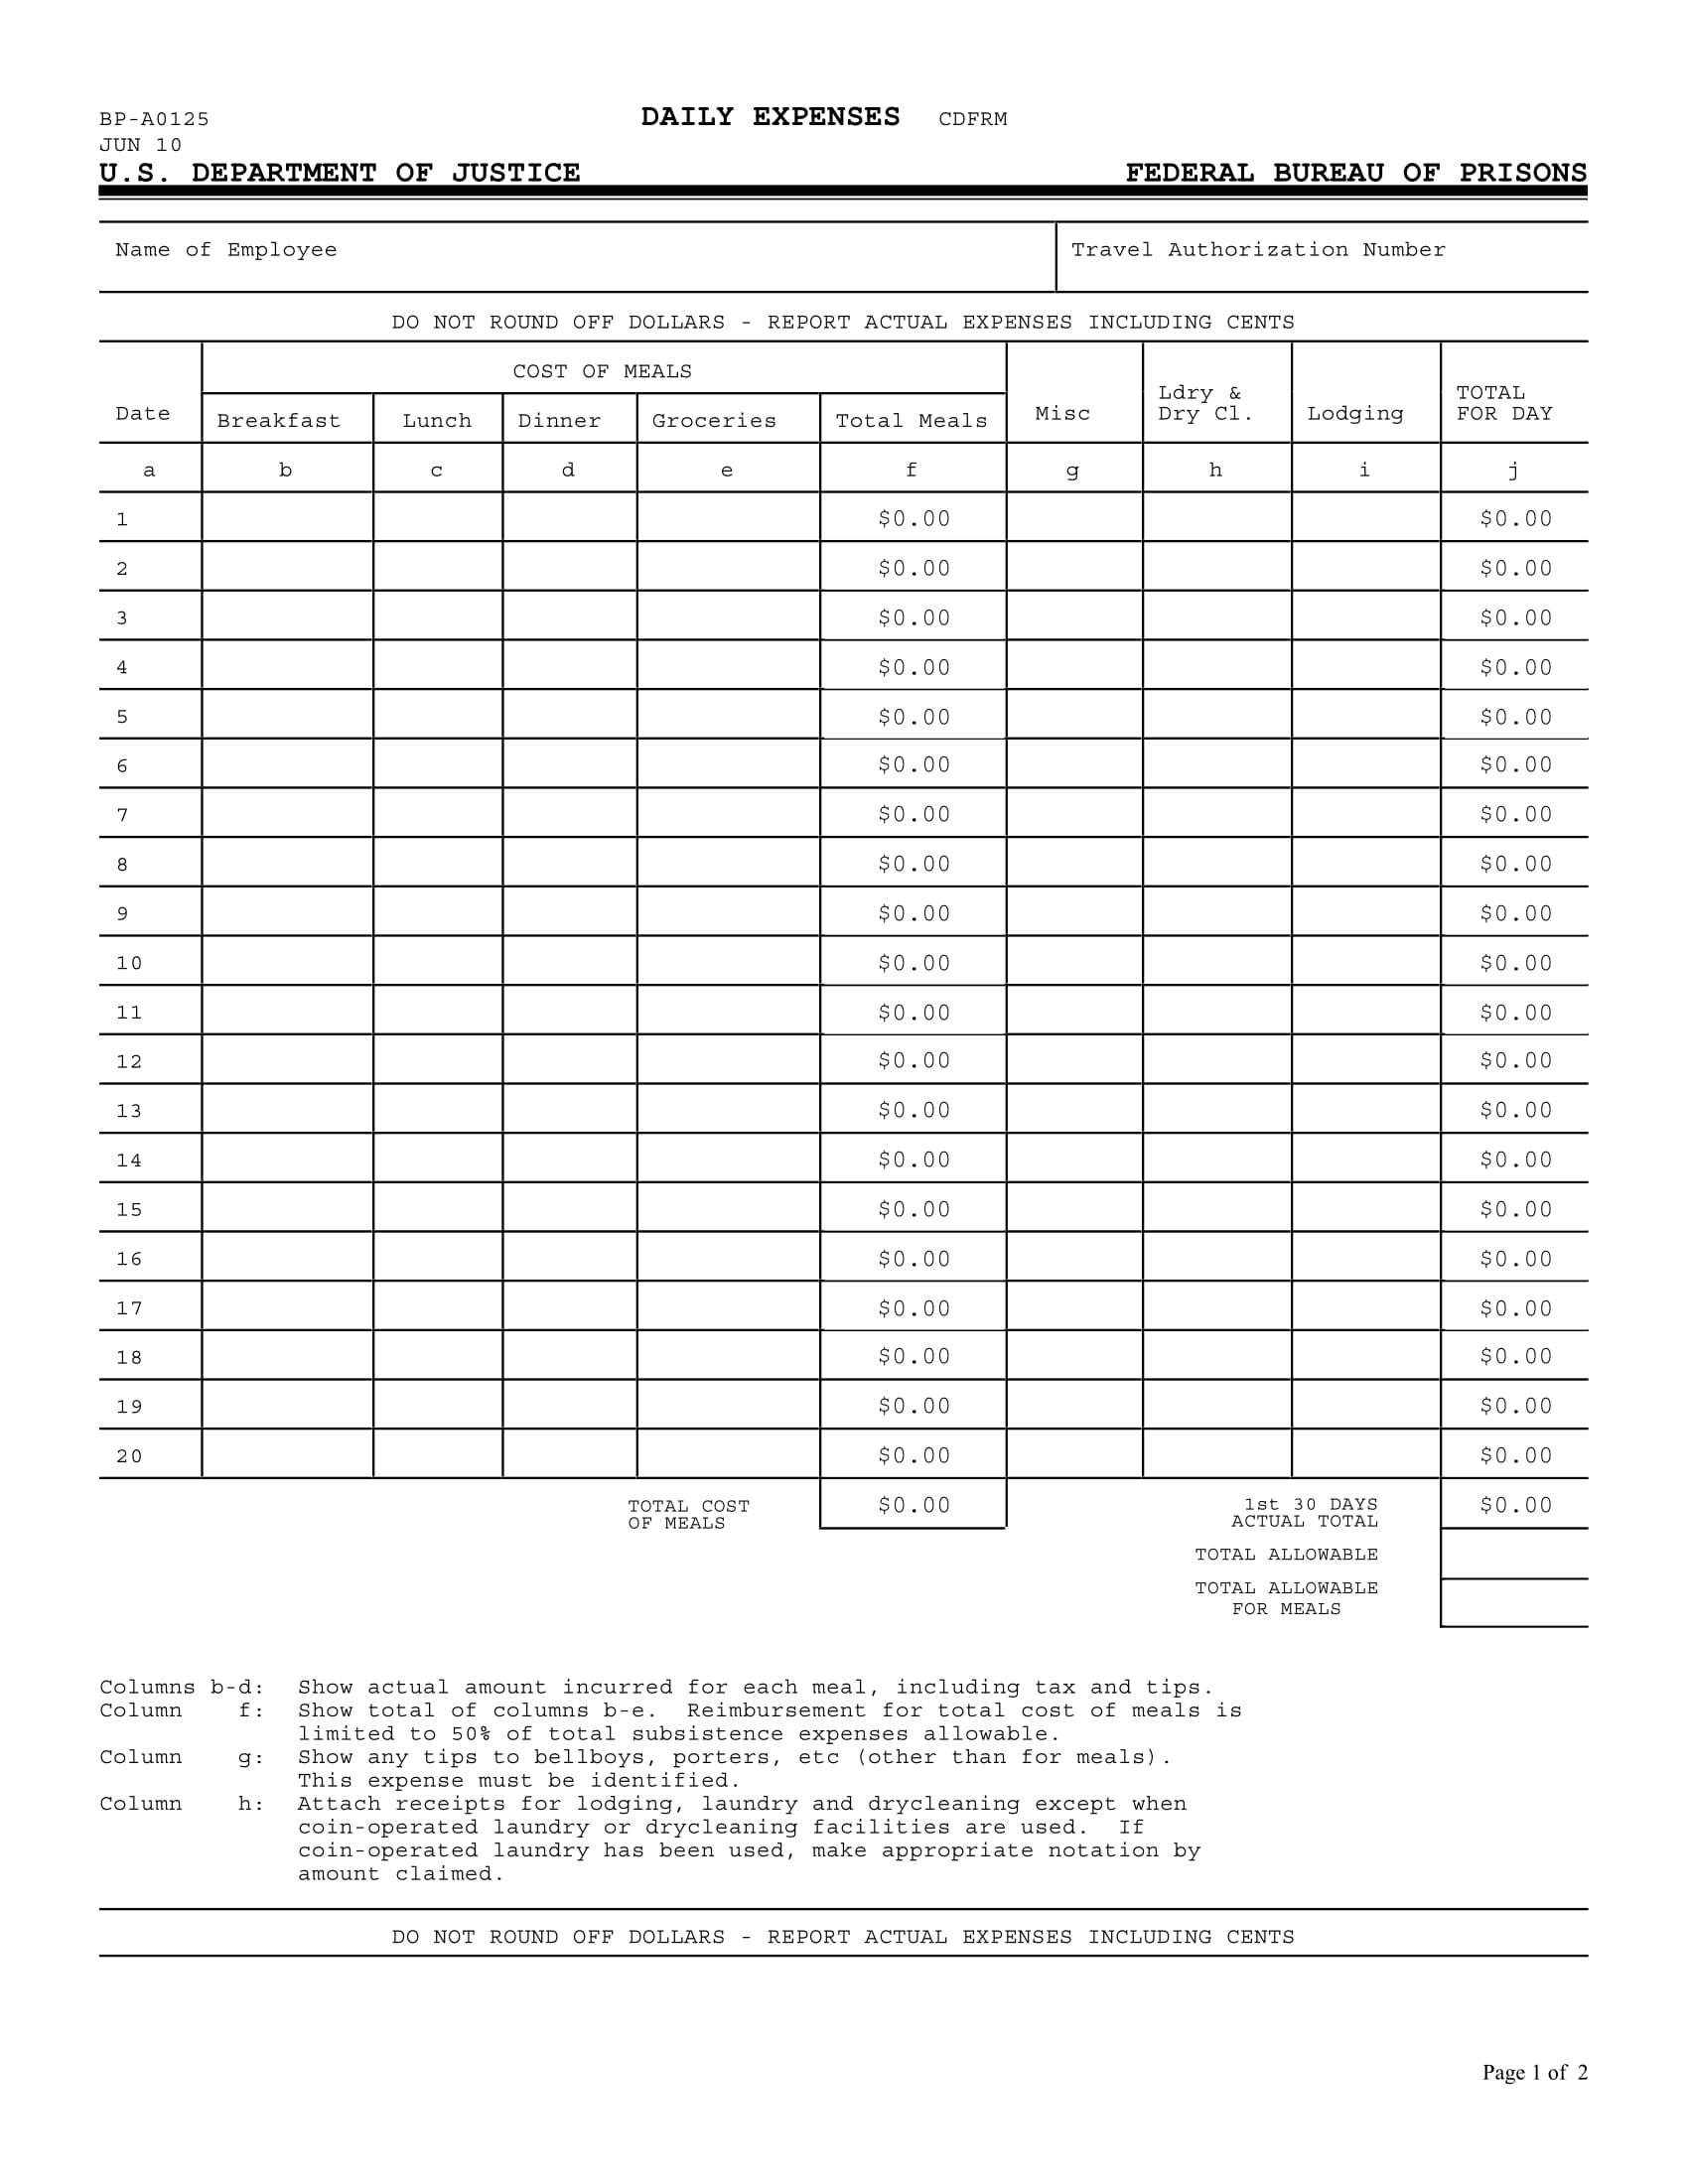 daily sales expense report form 1